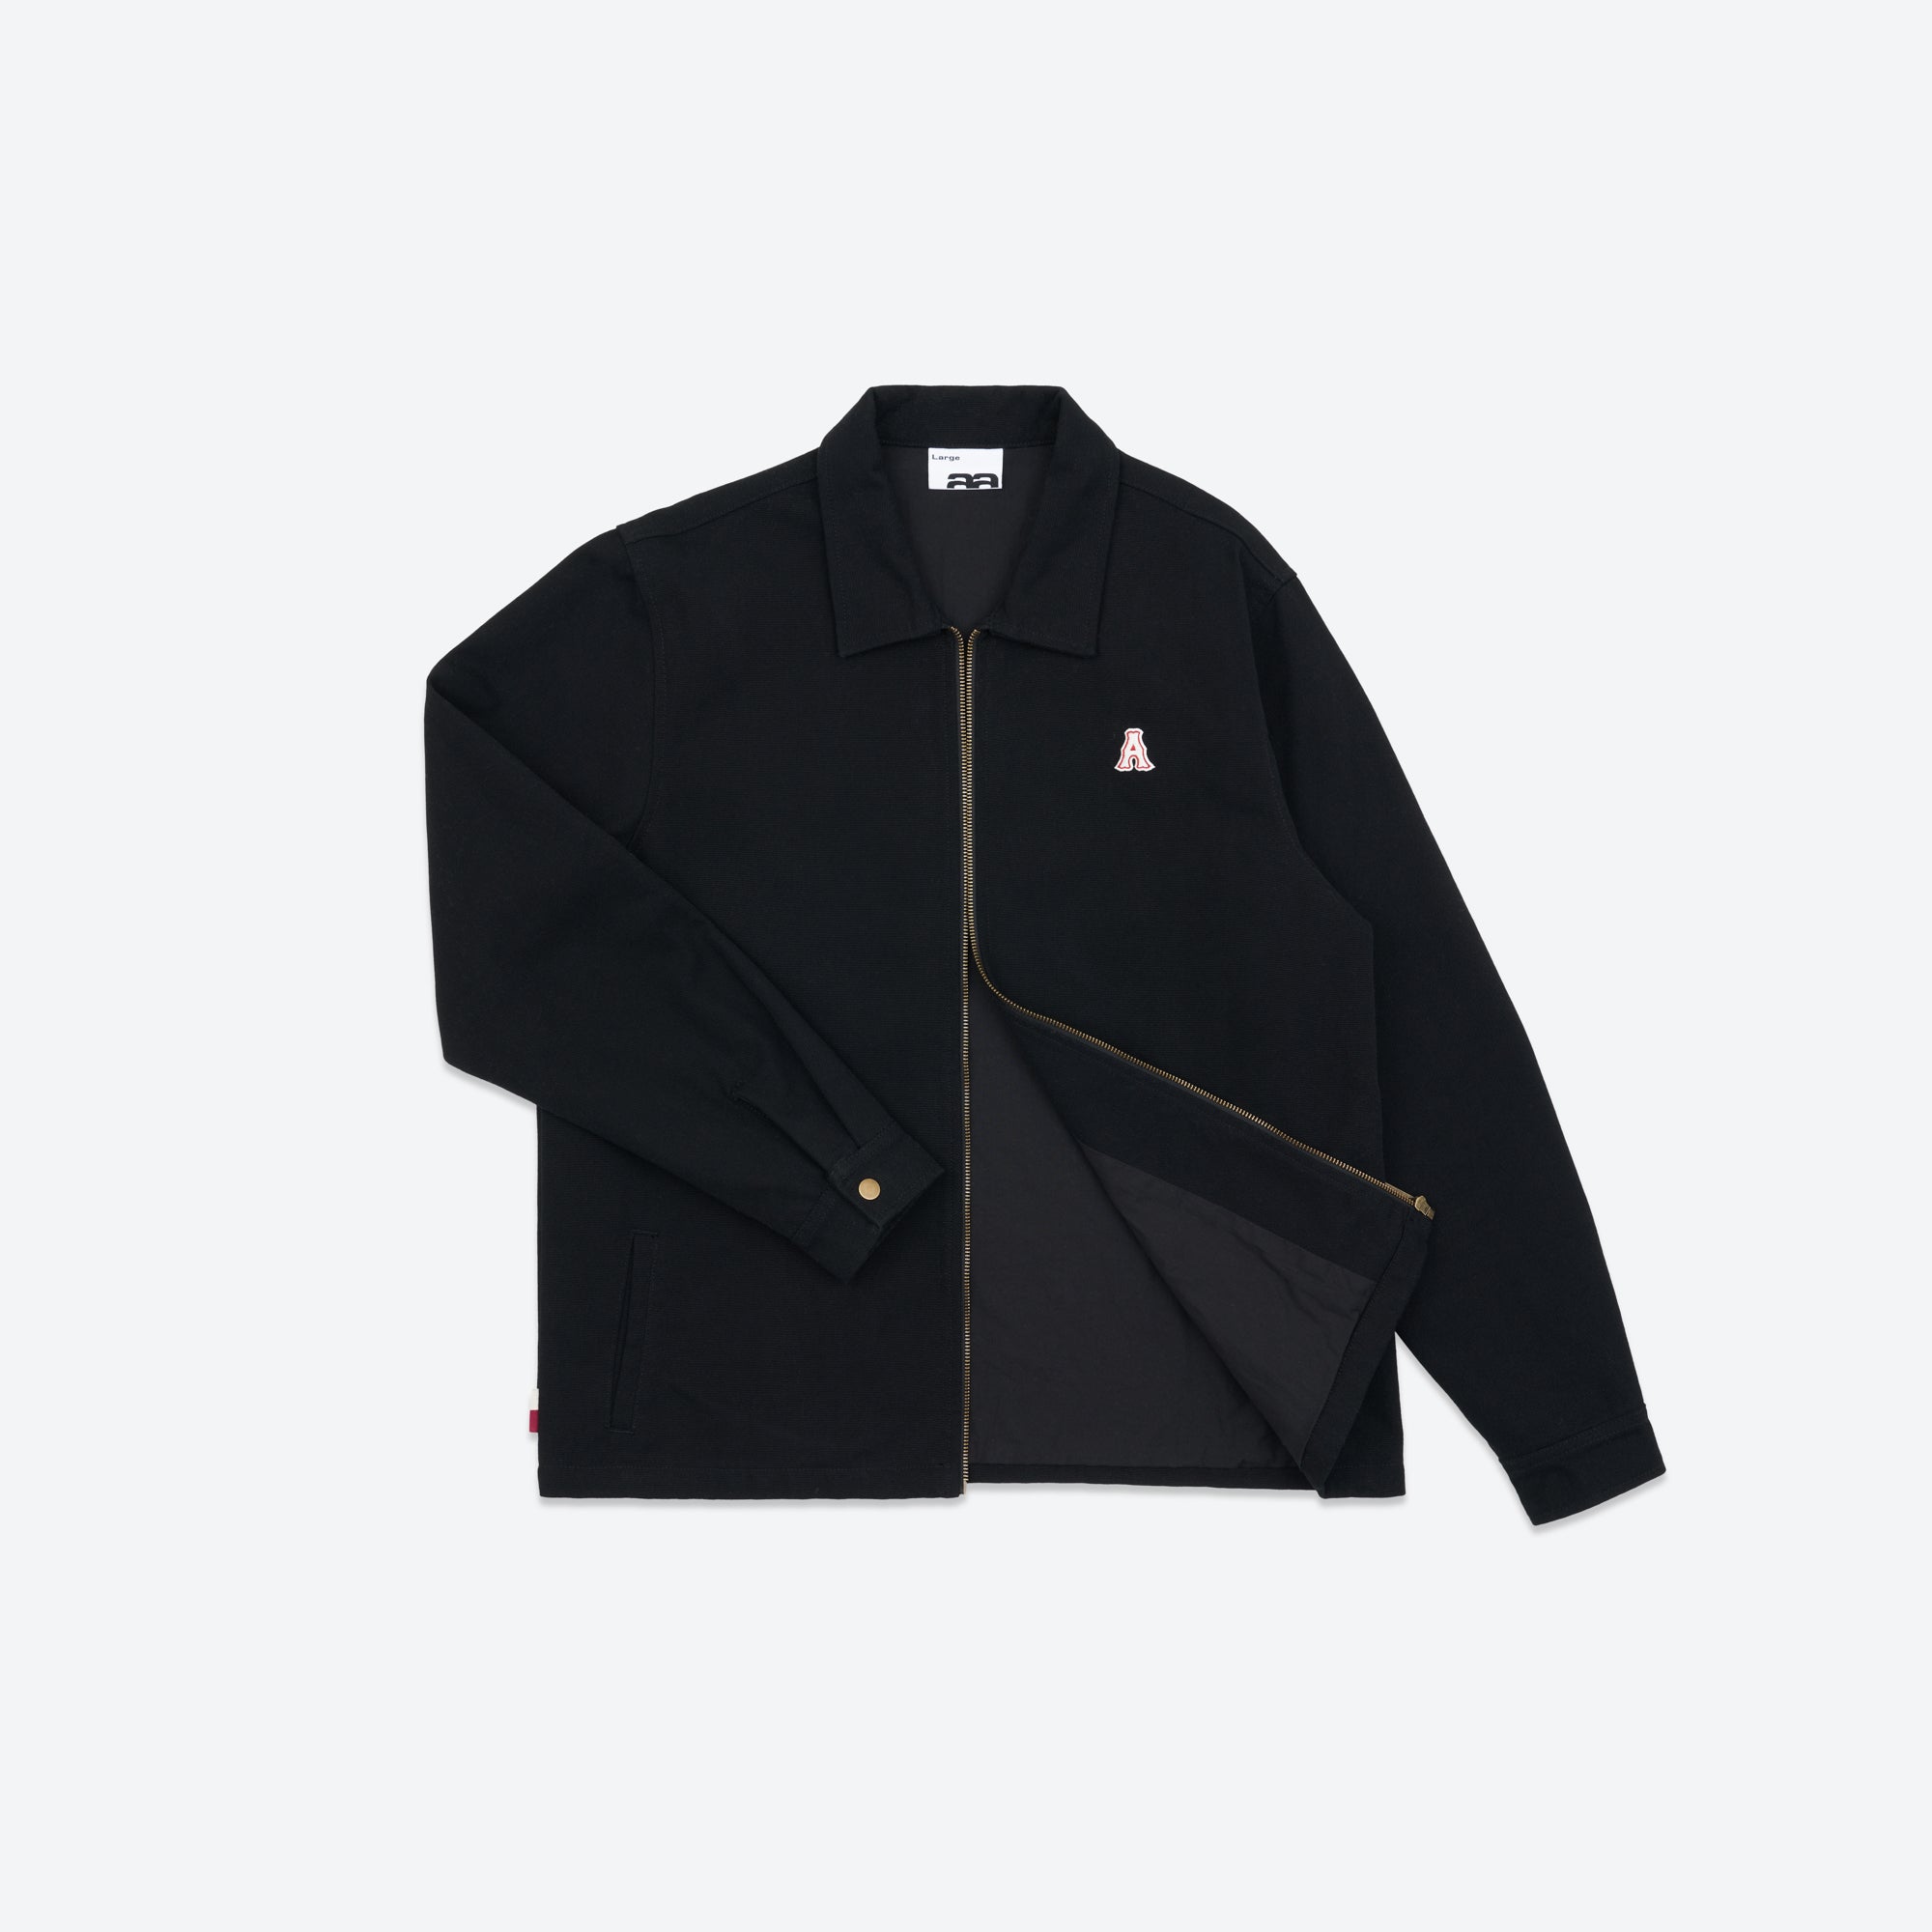 Alfred's Apartment - Trusted Jacket - Black